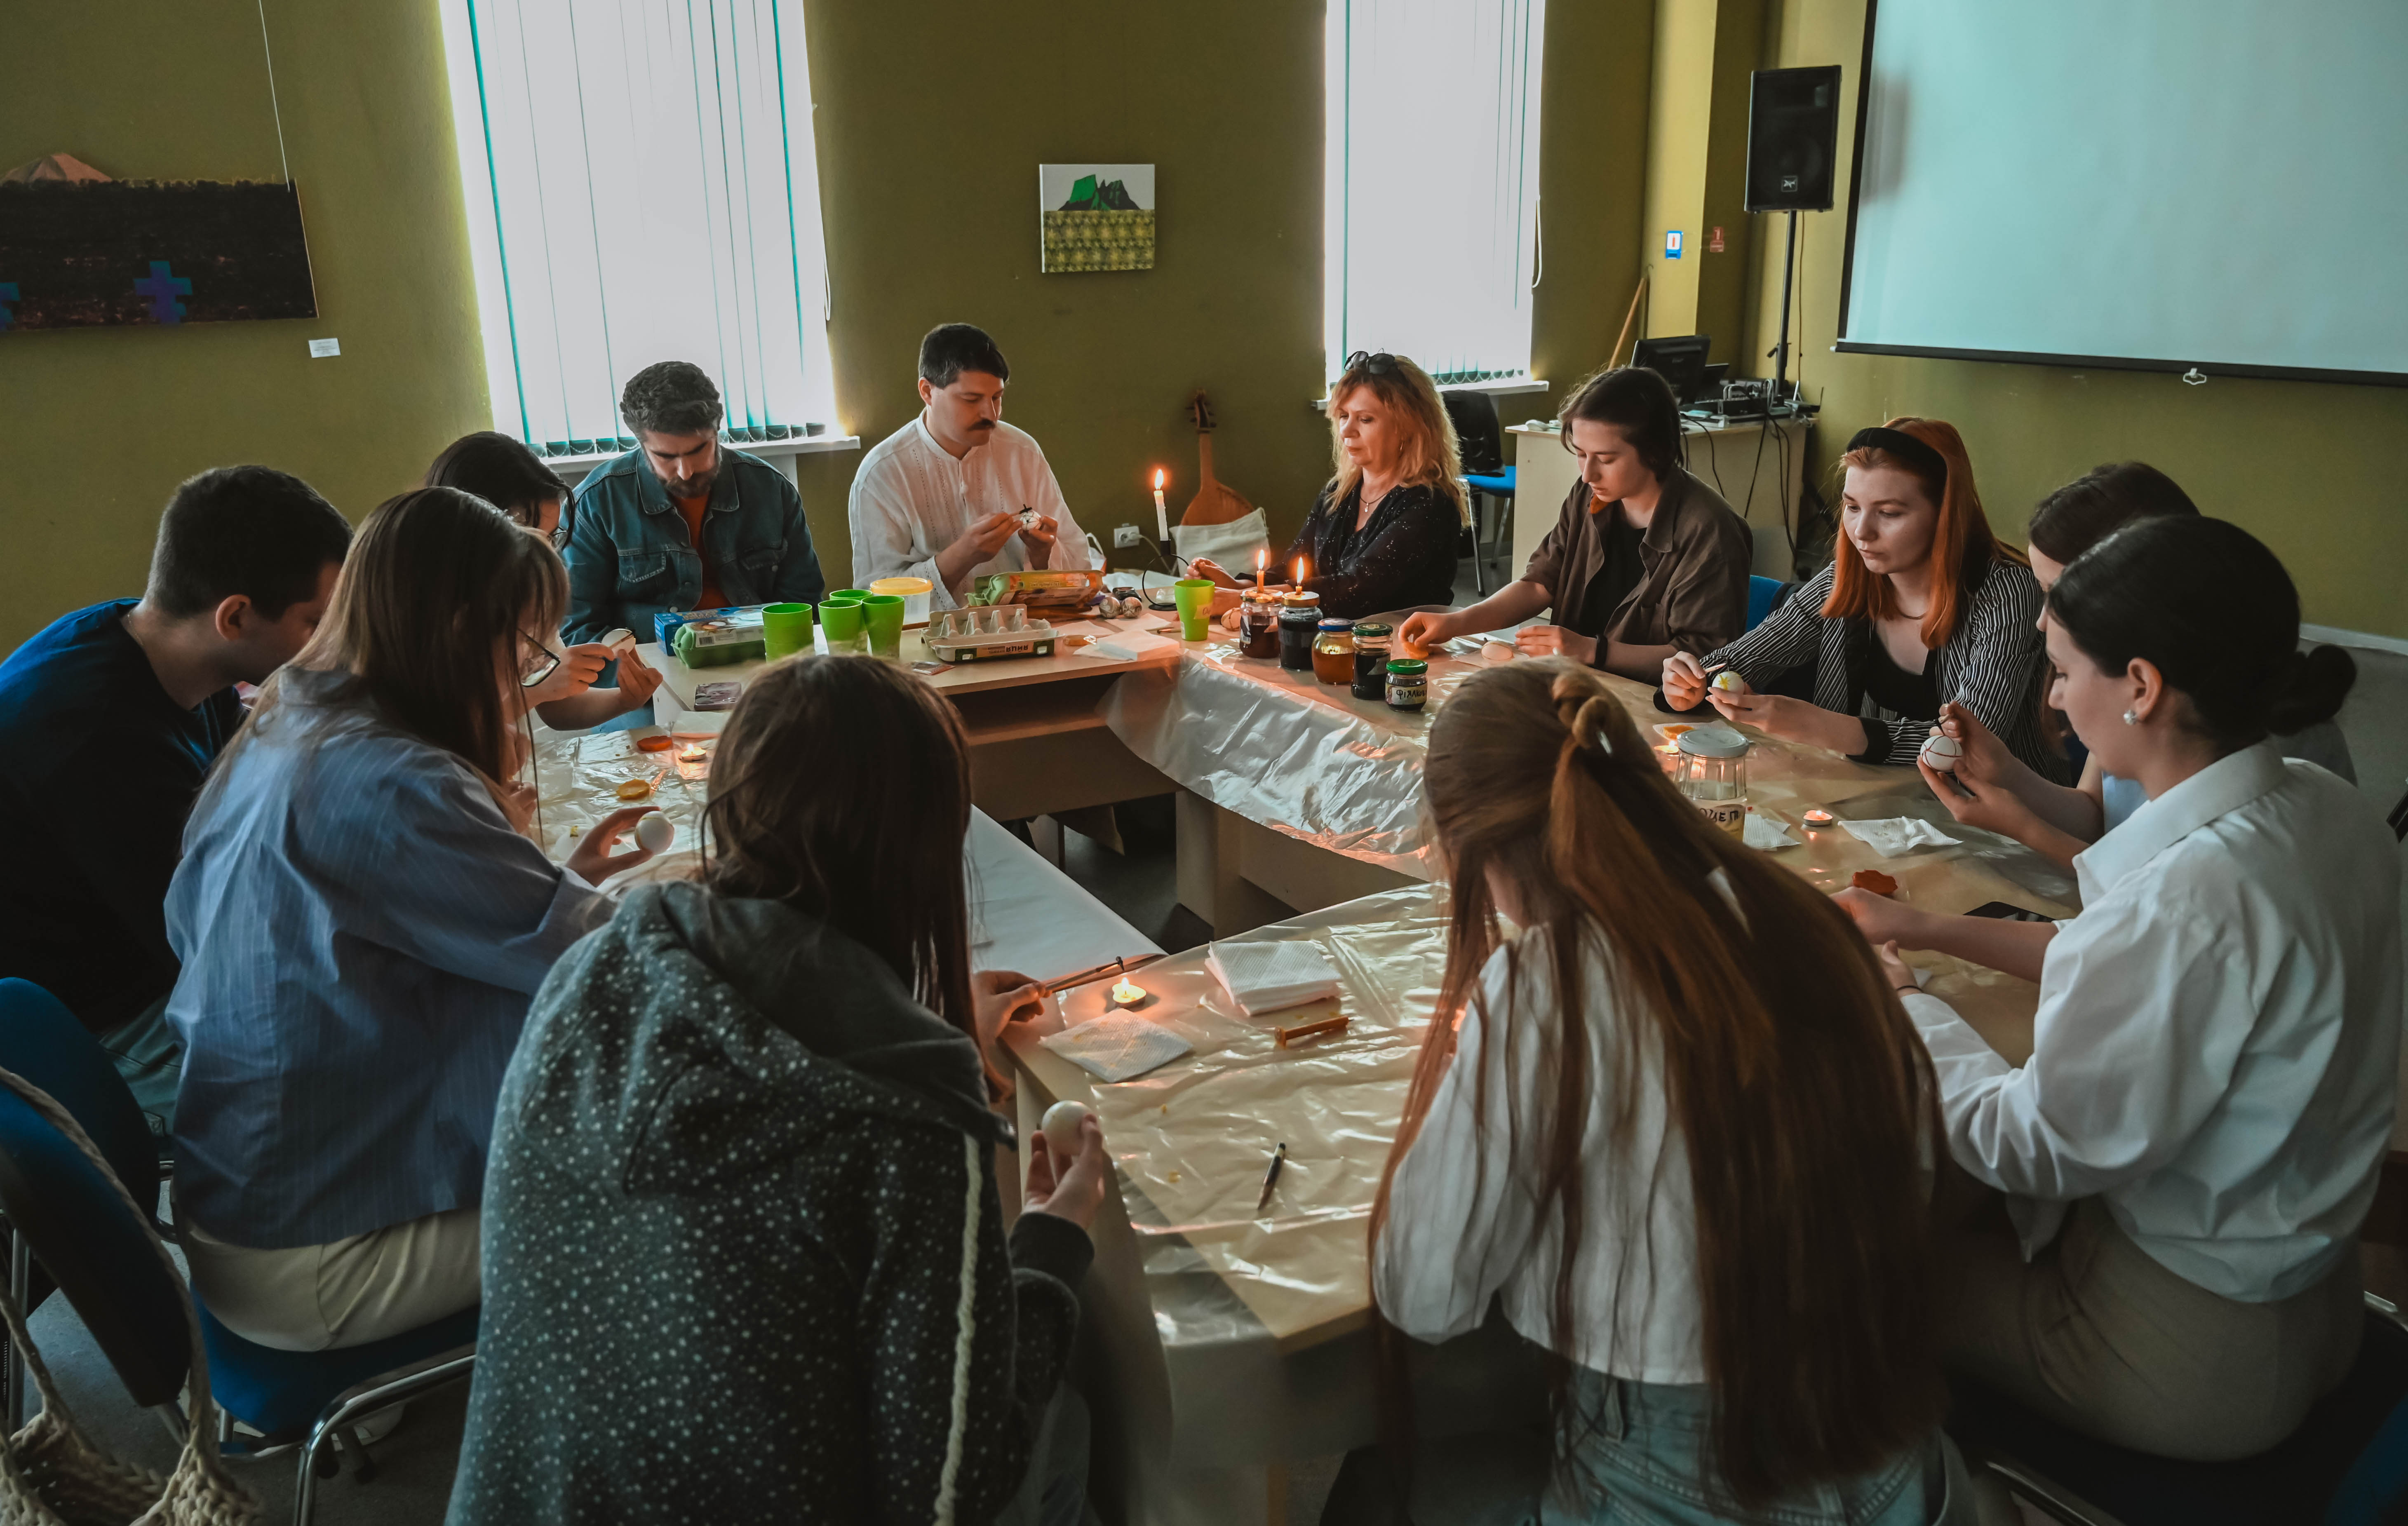 A master class in Easter egg decorating is held at the Centre for Contemporary Art: students create Easter amulets